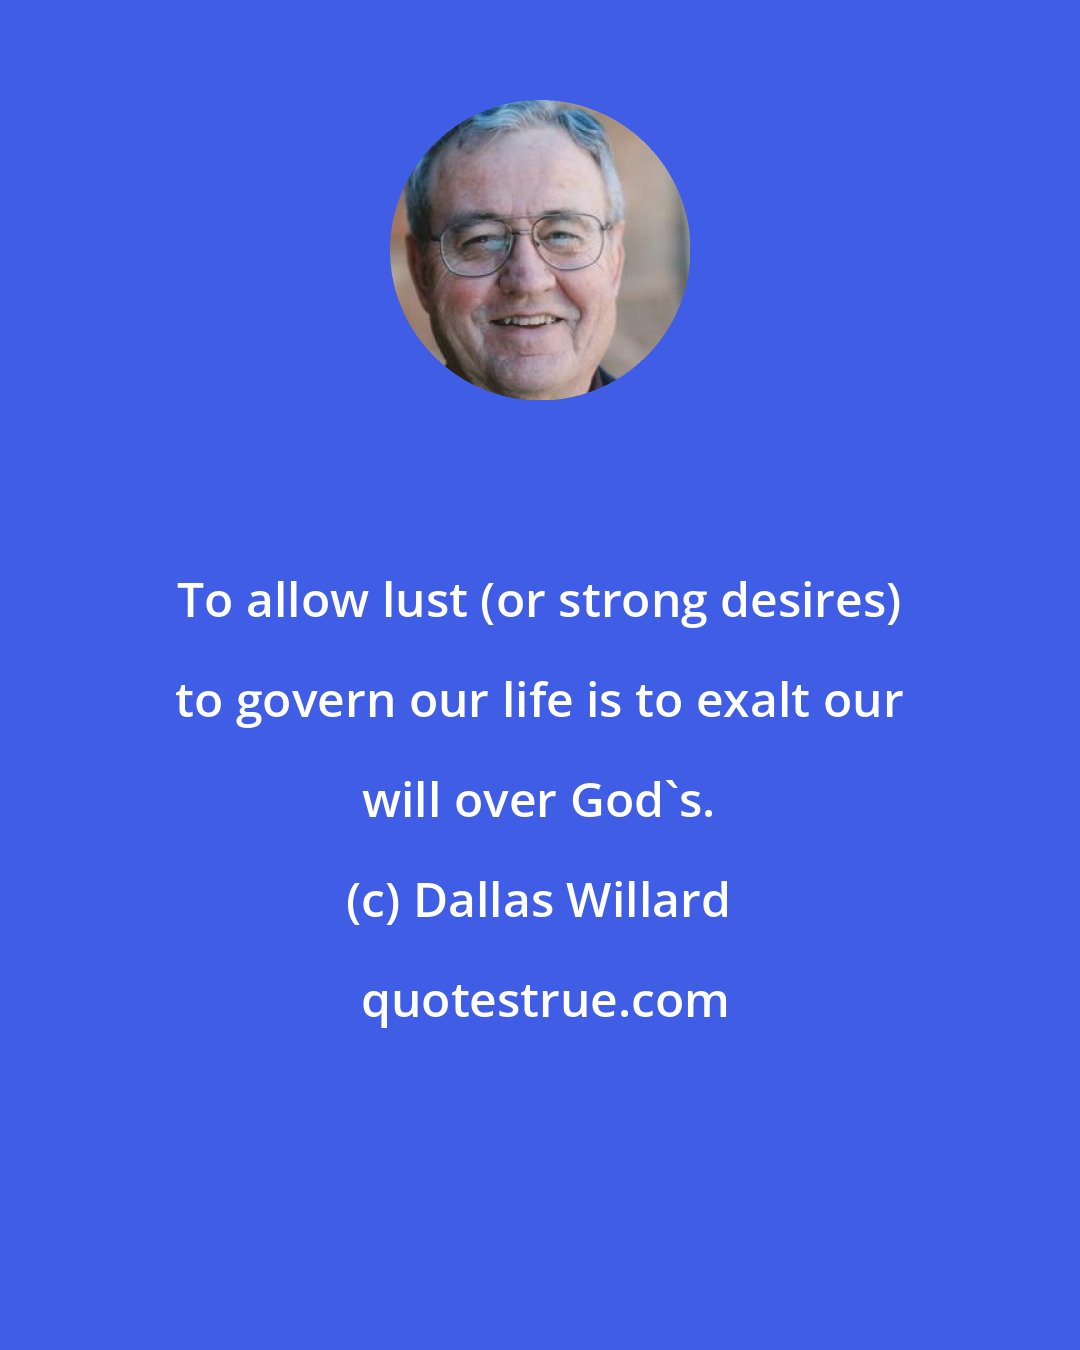 Dallas Willard: To allow lust (or strong desires) to govern our life is to exalt our will over God's.